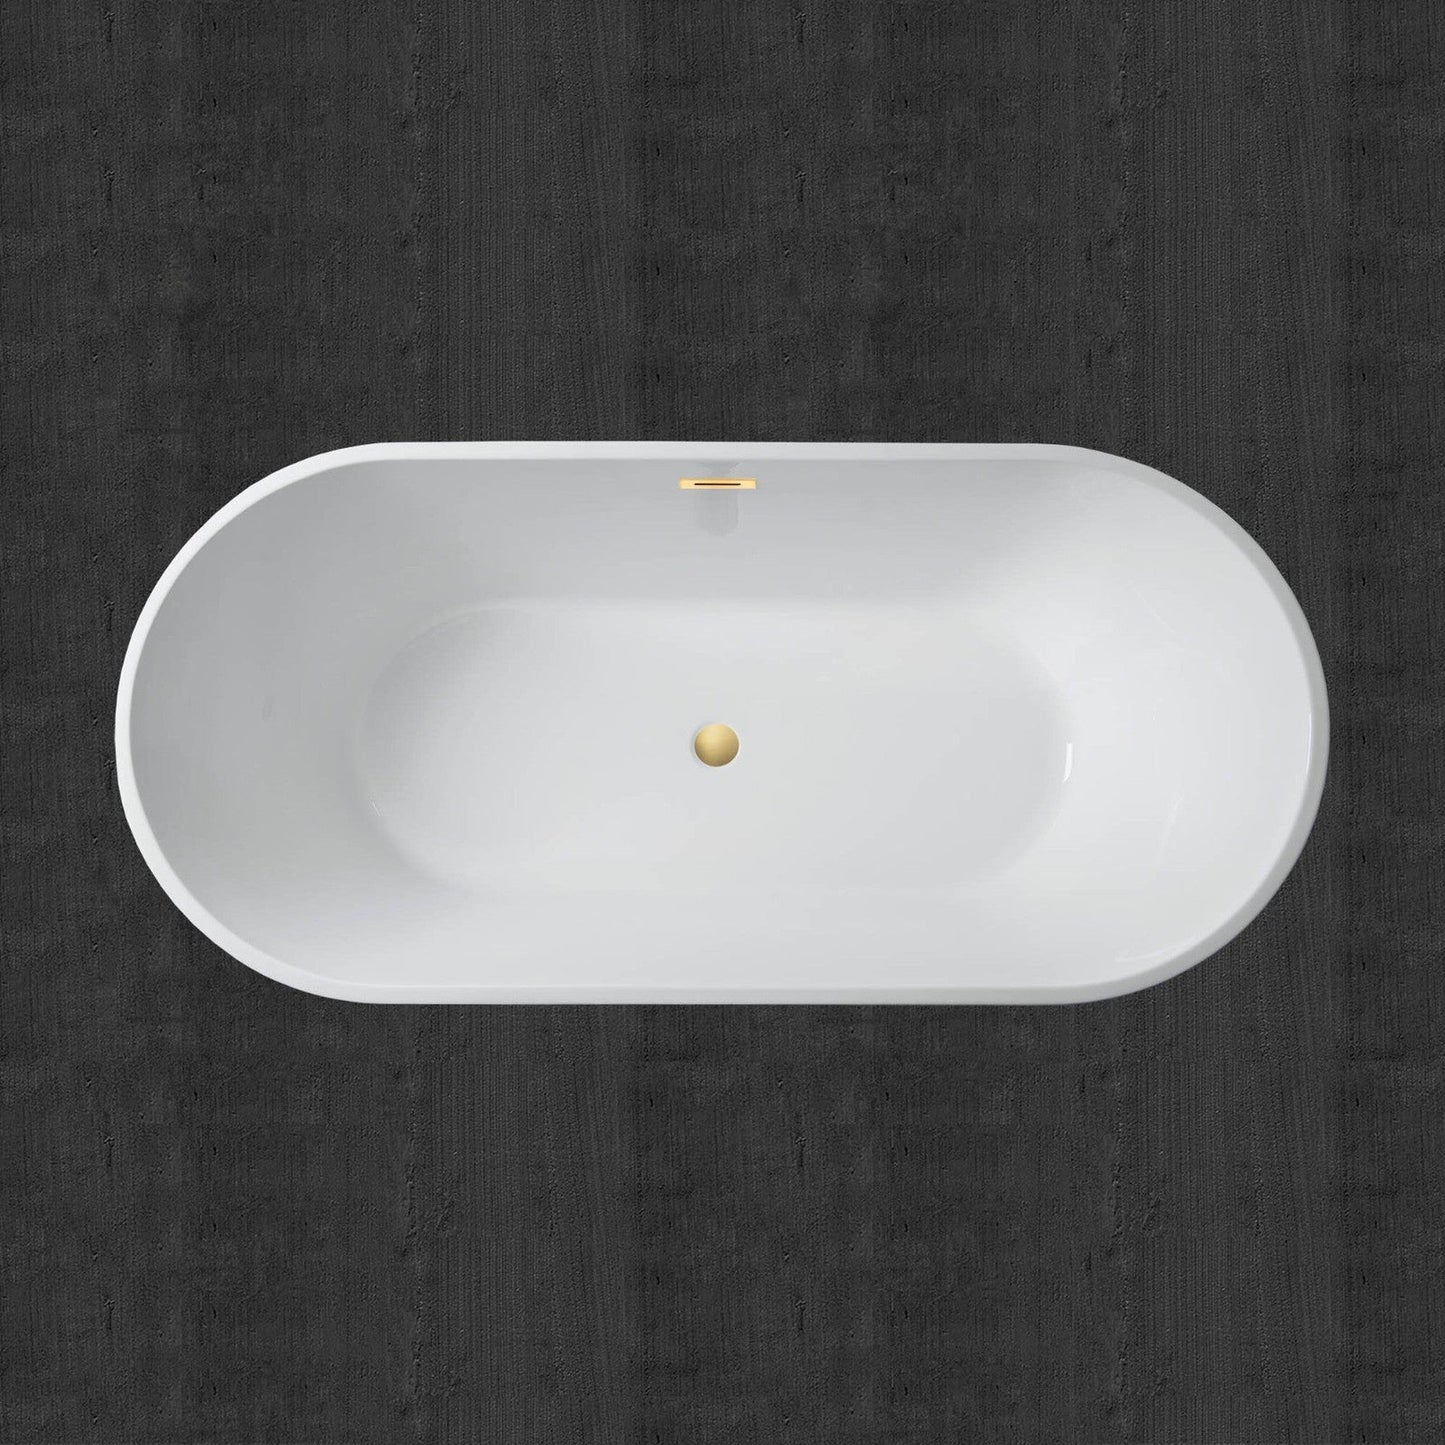 WoodBridge B0014 59" White Acrylic Freestanding Soaking Bathtub With Brushed Gold Drain, Overflow, F0073BGVT Tub Filler and Caddy Tray